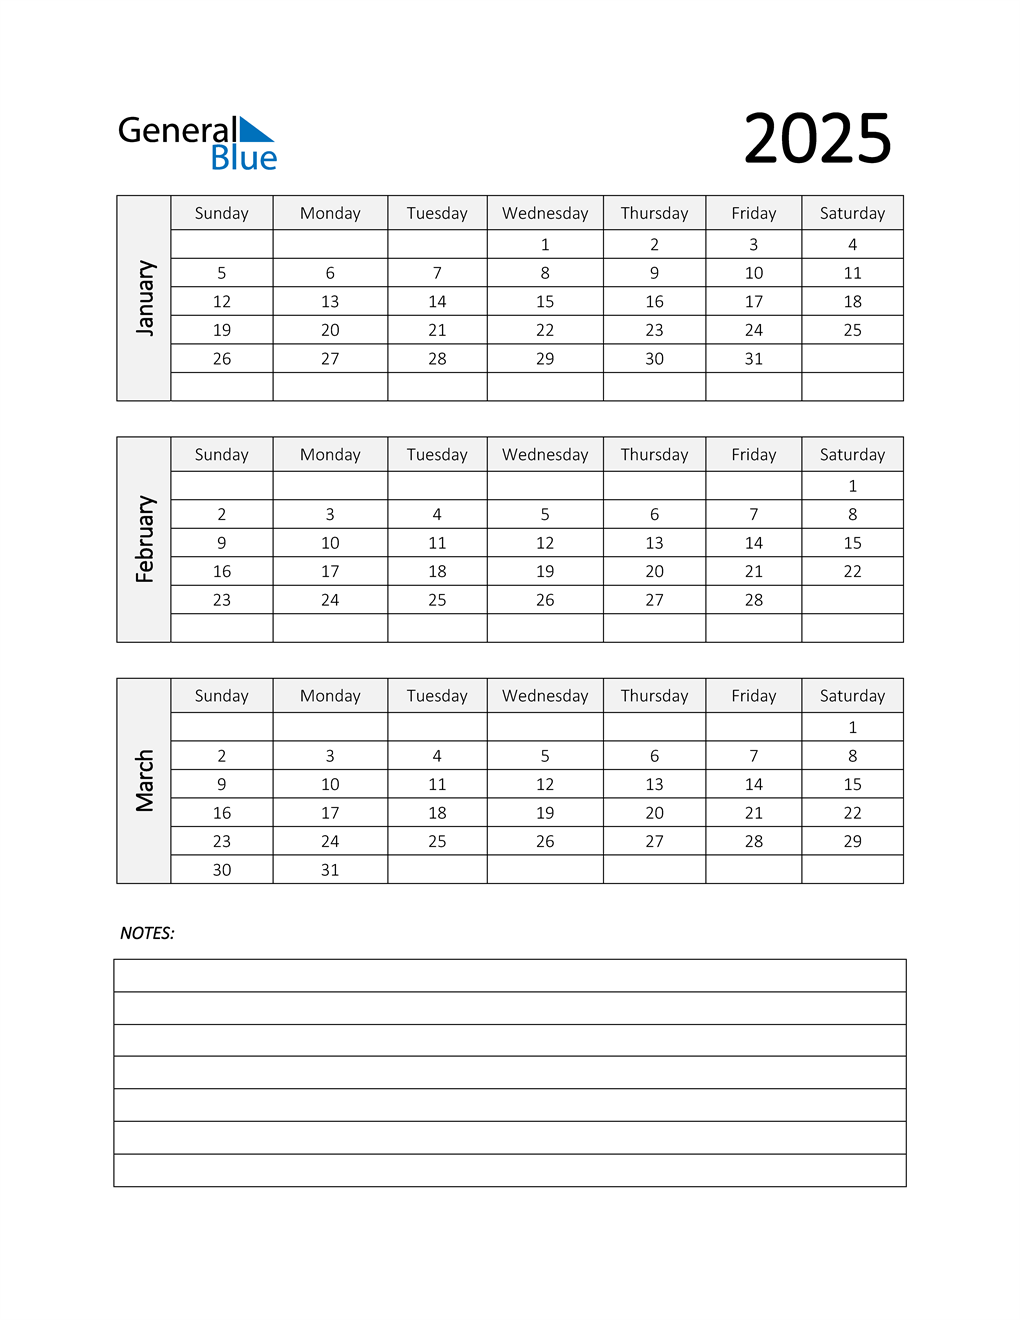  Q1 2025 Calendar with Notes